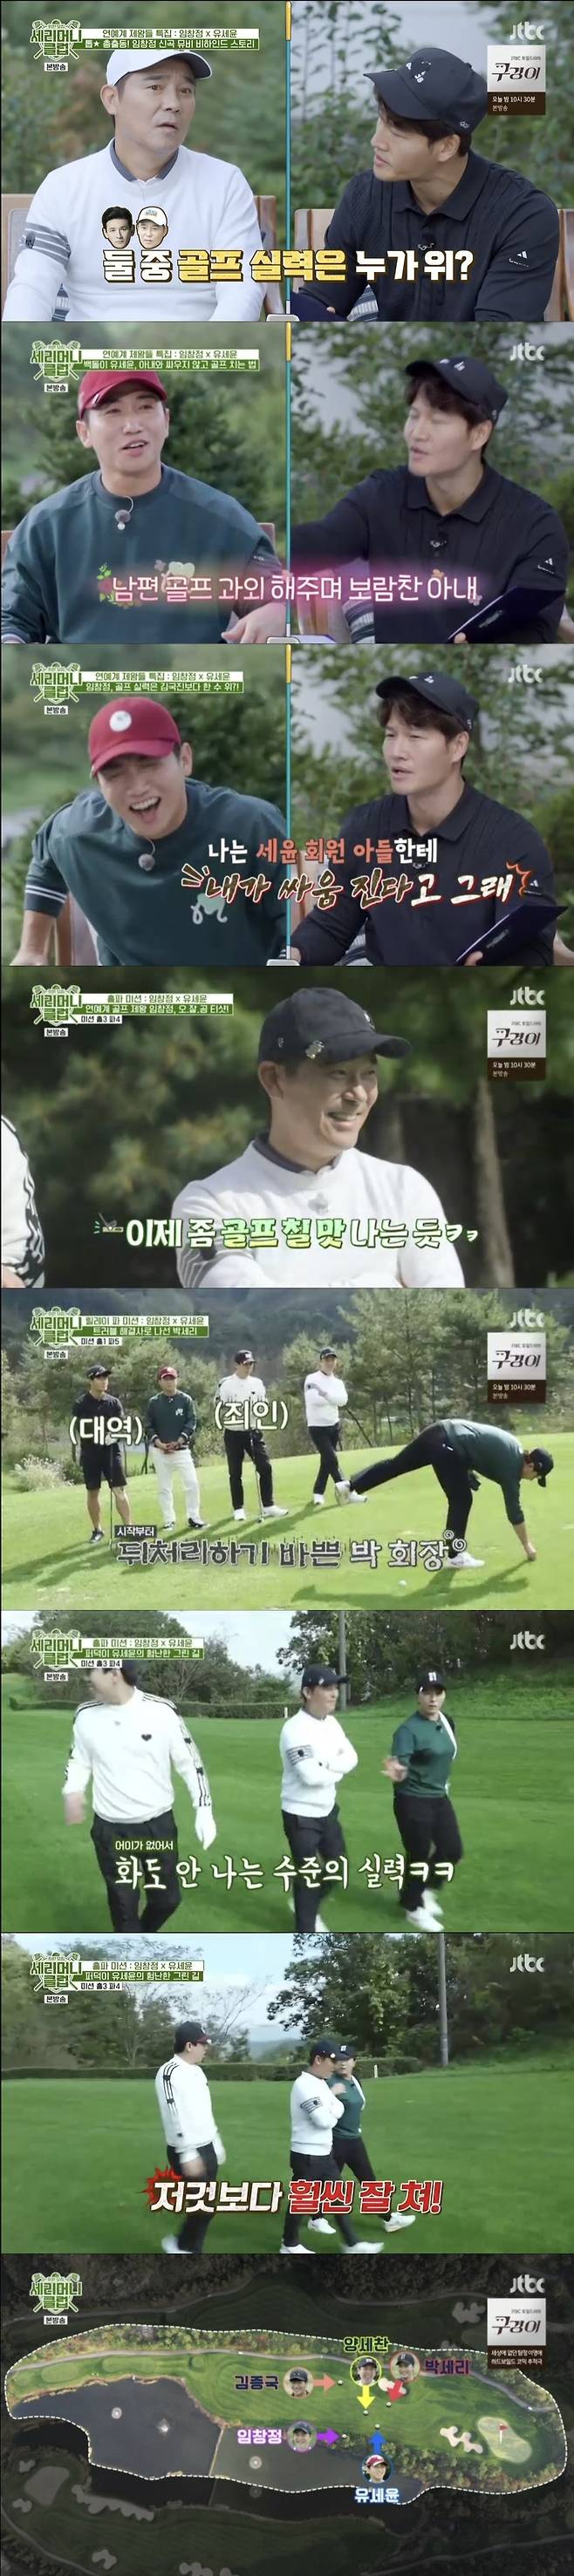 Im Chang-jung and Yoo Se-yoon showed their dramatic and dramatic Golf skills.On November 13, JTBC entertainment program Serimmon Sams Club featured Im Chang-jung and Yoo Se-yoon as guests.On this day, Yoo Se-yoon brought a captive to laugh because he was afraid of losing the ball from the beginning.Im Chang-jung said, I fell in love with Golf through Pak Se-ri.When I won the US Open, I saw that Pak Se-ri was so beautiful and cool that I could be sexy. Yoo Se-yoon also praised Pak Se-ri, saying, I once had a chance, but I wanted to be more friendly because of the delicateness hidden in my mind.Kim Jong-kook joked, Lets beat it with that delicateness, and Pak Se-ri also playfully tapped Yoo Se-yoon, If you bring it this much, its worth the trouble.Im Chang-jung, an entertainment group, said, The album comes out once a year.I do not have a good musical video drama these days, but I made a music video lineup with old Joel Feelings  I seem to have made a lot of Acting with Hwang Jung-min, but I have met like an old movie called The most beautiful week of my life.I have never talked to him. He was Acting in front of me, so I could not act. Kim Jong-kook said, Do you two often play Golf? And Im Chang-jung said, Its perfect.Someone who is good at condition without such a thing is winning. Kim Jong-kook also told Yoo Se-yoon, Mr. Se-yoon says that Golf Mait is his wife., and Yoo Se-yoon replied, Ive been playing two at night these days, so Im going to go.Im Chang-jung told such a yoo Se-yoon, If you go with your wife and Golf course, you will fight a lot., and Yoo Se-yoon said, Its Feelings, which makes relationships better because Im far below my wife, and Im proud when shes cute and she teaches me.I am alive, he said, expressing his affection for his wife.Kim Jong-kook acknowledged that teaching your husband is okay and Yoo Se-yoon introduced himself as an influencer, not a comedian.Yang Se-chan responded that he was a comedian, and Yoo Se-yoon responded, The gag stage is gone.Kim Jong-kook pointed out, There are juniors, and what is an influencer?Yoo Se-yoons hobby is to take a fun video at Golf course. Yoo Se-yoon said, Im a white stone, but its too bad to hit Golf.I take a lot of pictures and videos at Golf course, but I want to take a special picture, so I took a lot of sympathy. Kim Jong-kook added, I just do a lot of strange things. I wear glasses and go in and bring the ball. Pak Se-ri said, You think back and forth, do you shoot?Yoo Se-yoon said, The back stones look back and look back, and then play before the ball falls. Golf has 10 years, so the score was 200, 108, and 96 in Yoo Se-yoon, which has 10 years of strength.Kim Jong-kook said, Im Chang-jung, what percentage of the top performers in the entertainment industry Golf?Im Chang-jung said, I think the national team is playing a little better than my brother.If I put it right, I was right about my brother 10 years ago. My skills are similar in about 10 years.Our son went out once to broadcast his brother, but he said he was better than me. My child was shaking his arm. Kim Jong-kook said, The children are my dad.I say that I am fighting when Seyun meets son. Yoo Se-yoon responded that he was absurd, saying, Will our children believe it? Yoo Se-yoon was at Golf with an extraordinary passion, but his performance was the worst: a series of mistakes, including a bunker after a ground ball, eventually led to Pak Se-ri being smacked.Next to Kim Jong-kook, who lost his word, Pak Se-ri said: Im crazy, its the worst ever guest ever, its really the worst.Even if women are only two to three months old, they are much better than that. Yang Se-chan also said, It is not enough for the original president to get rid of it. Pak Se-ri said, I can not speak because I am ridiculous.I can not get angry. Im Chang-jung laughed, saying, I will not be cursed even if I can not donate one won today. 